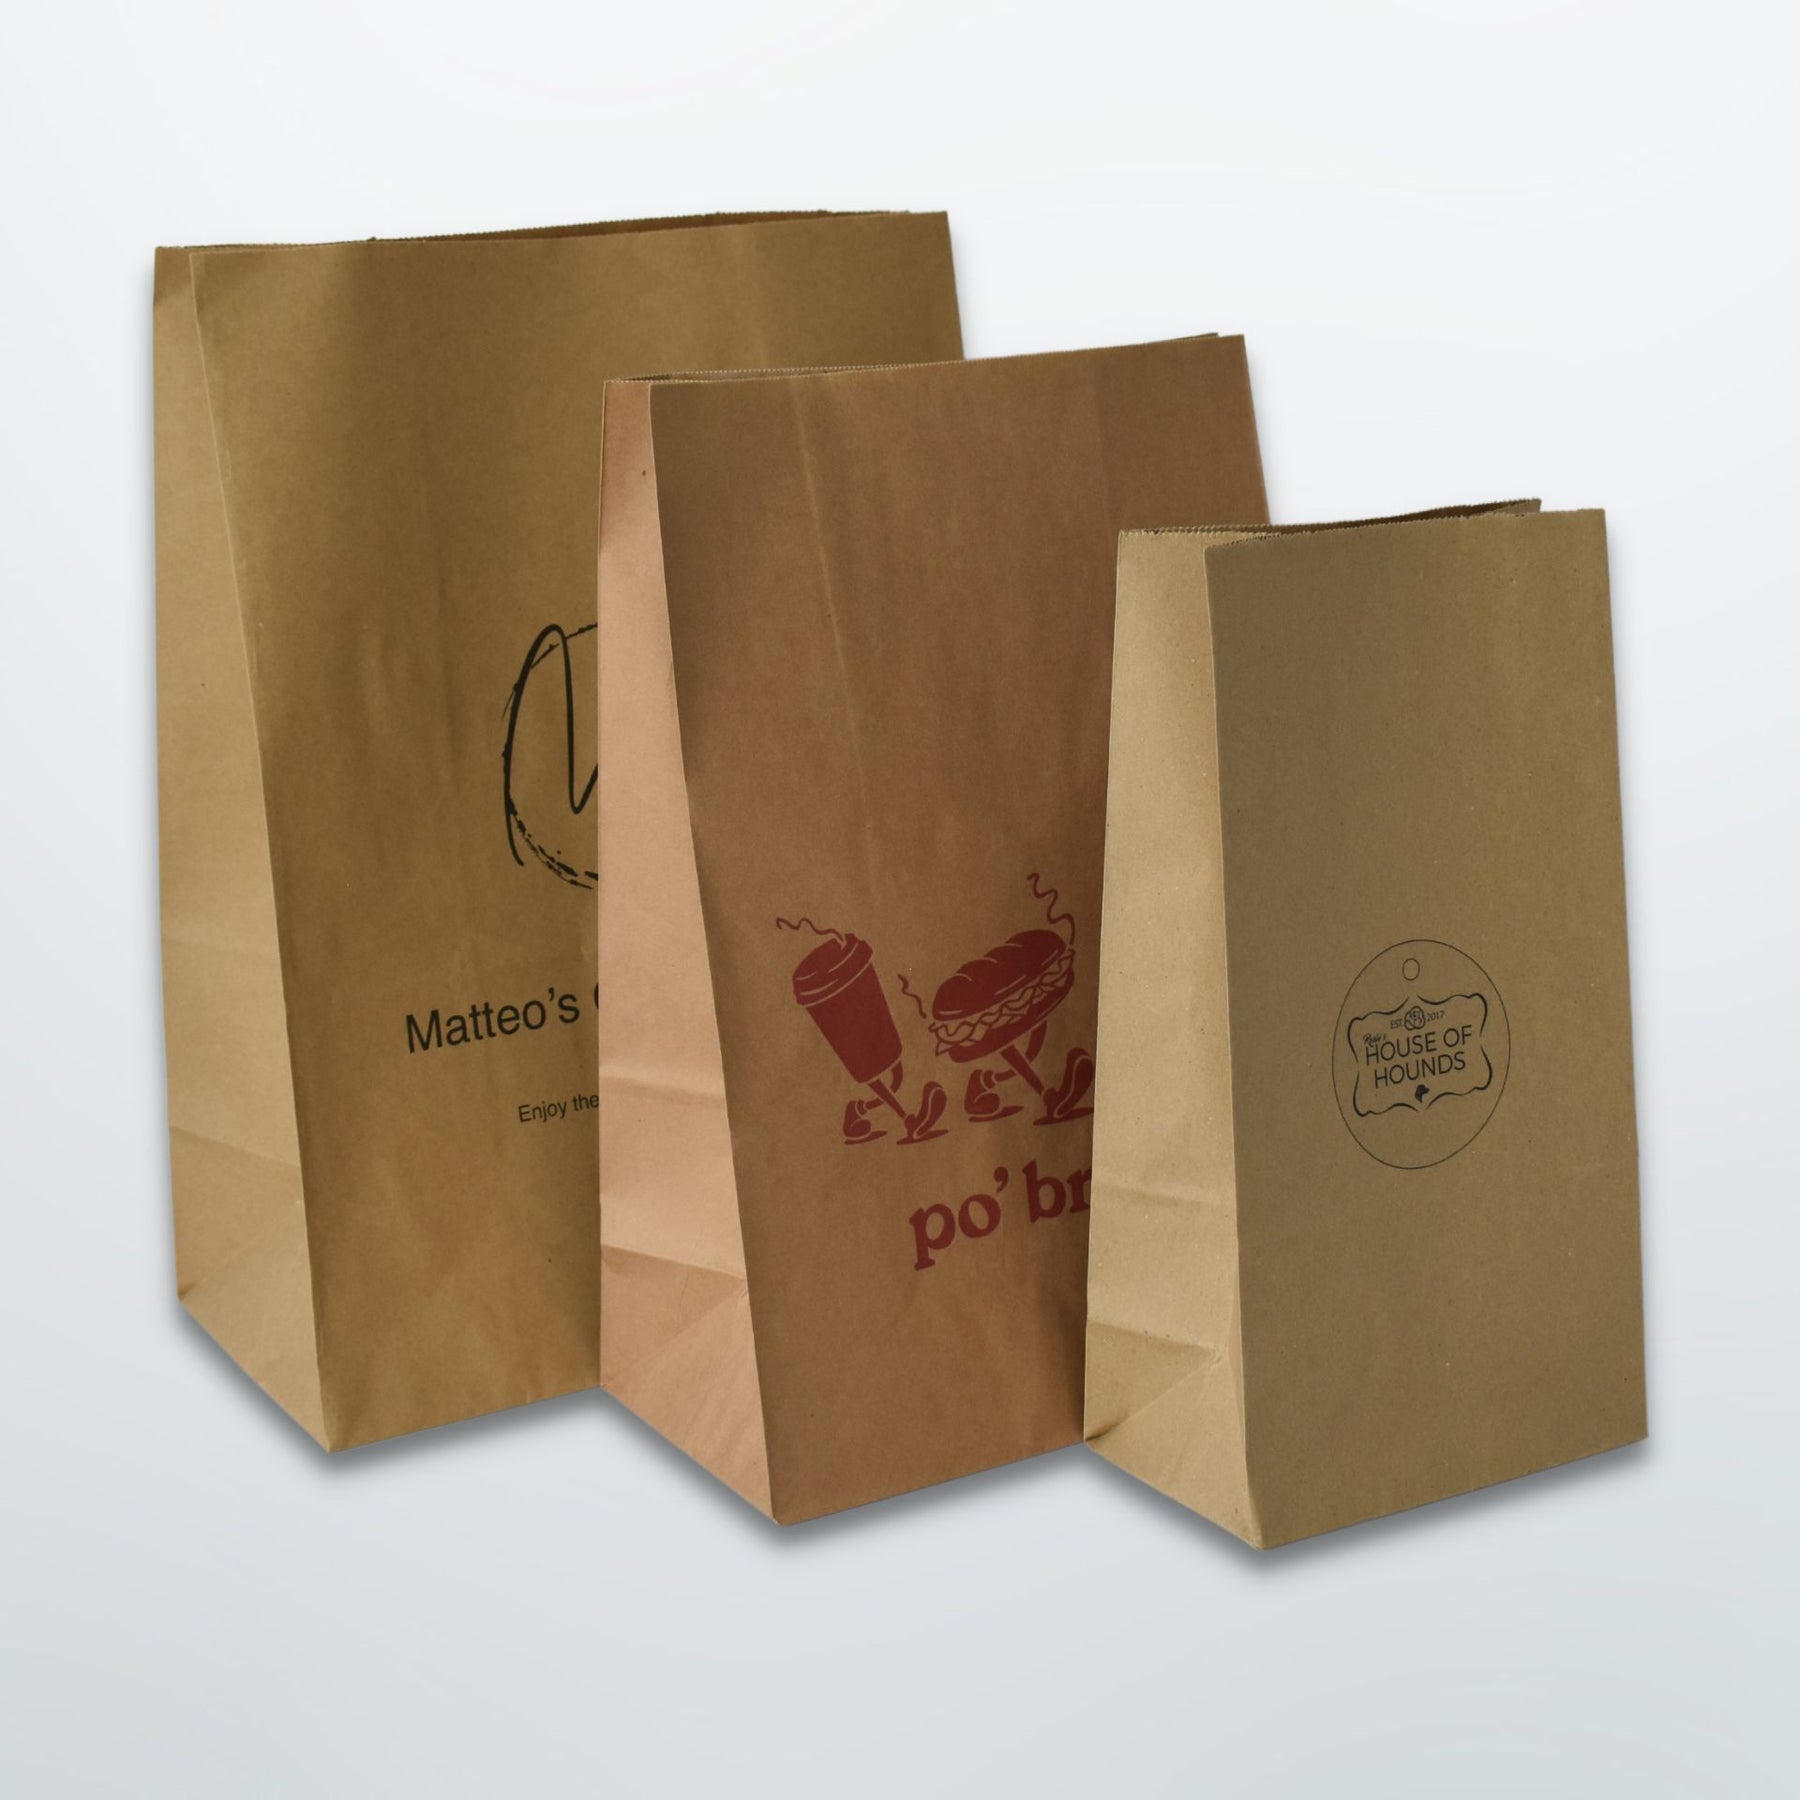 Wholesale Kraft Paper Bags for Retail & Food Service